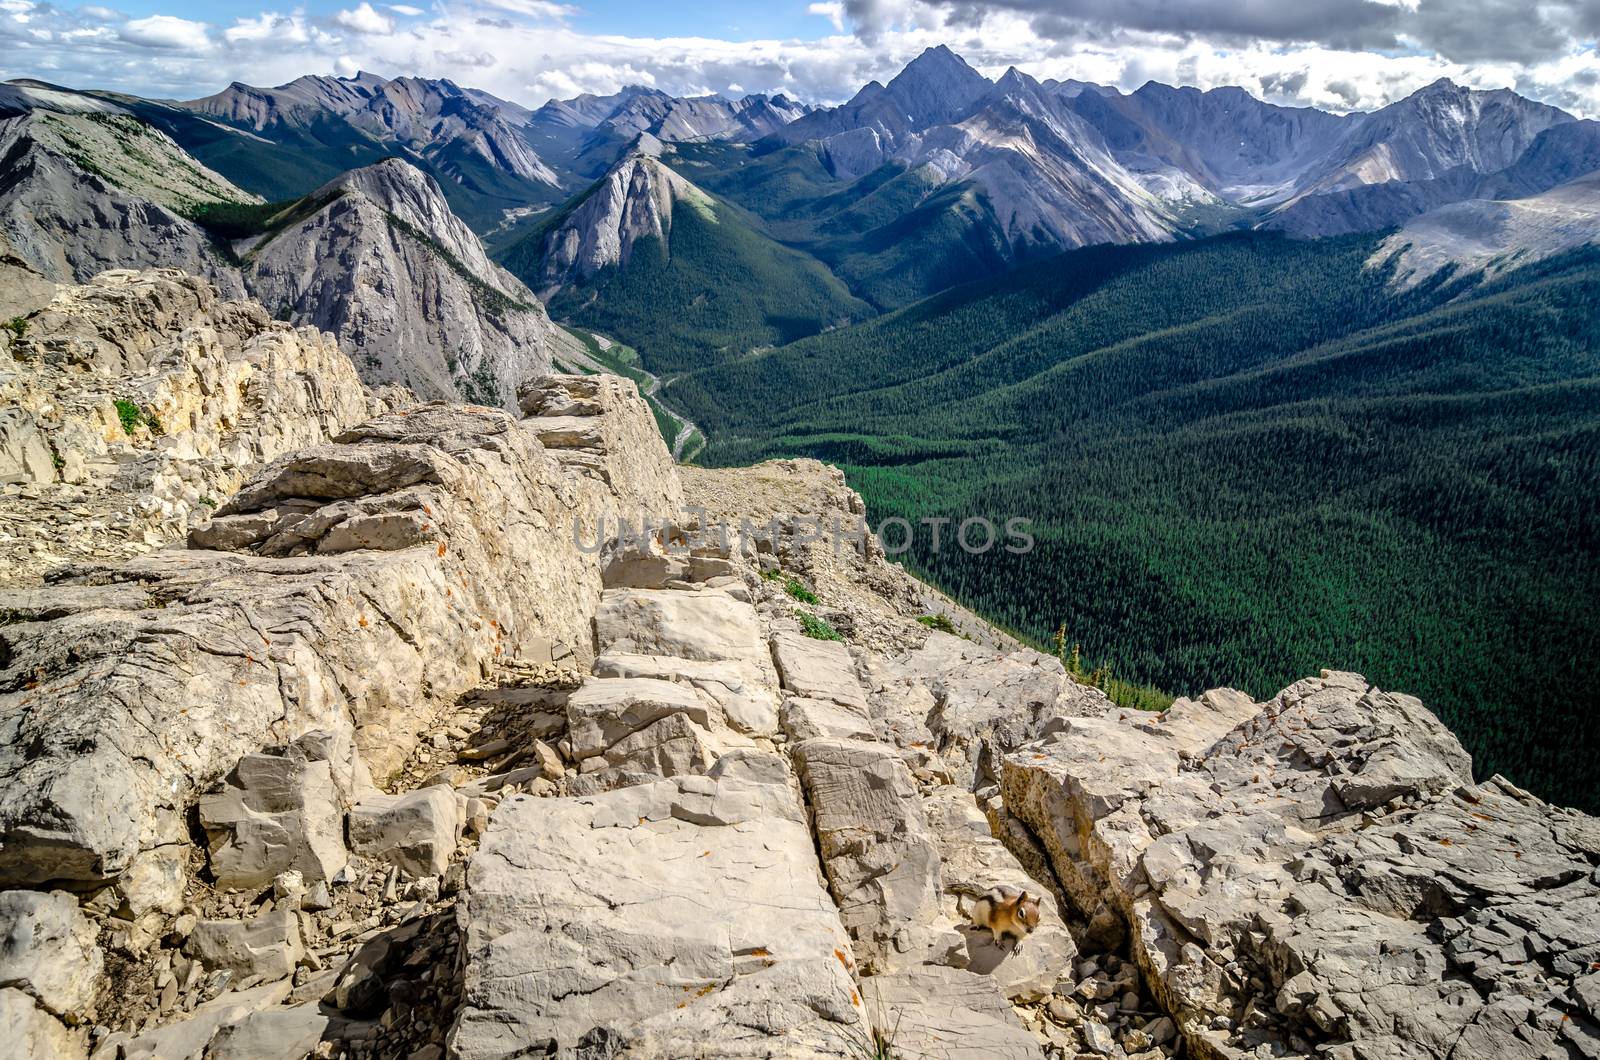 Mountains range view in Jasper NP with chipmunk in foreground by martinm303